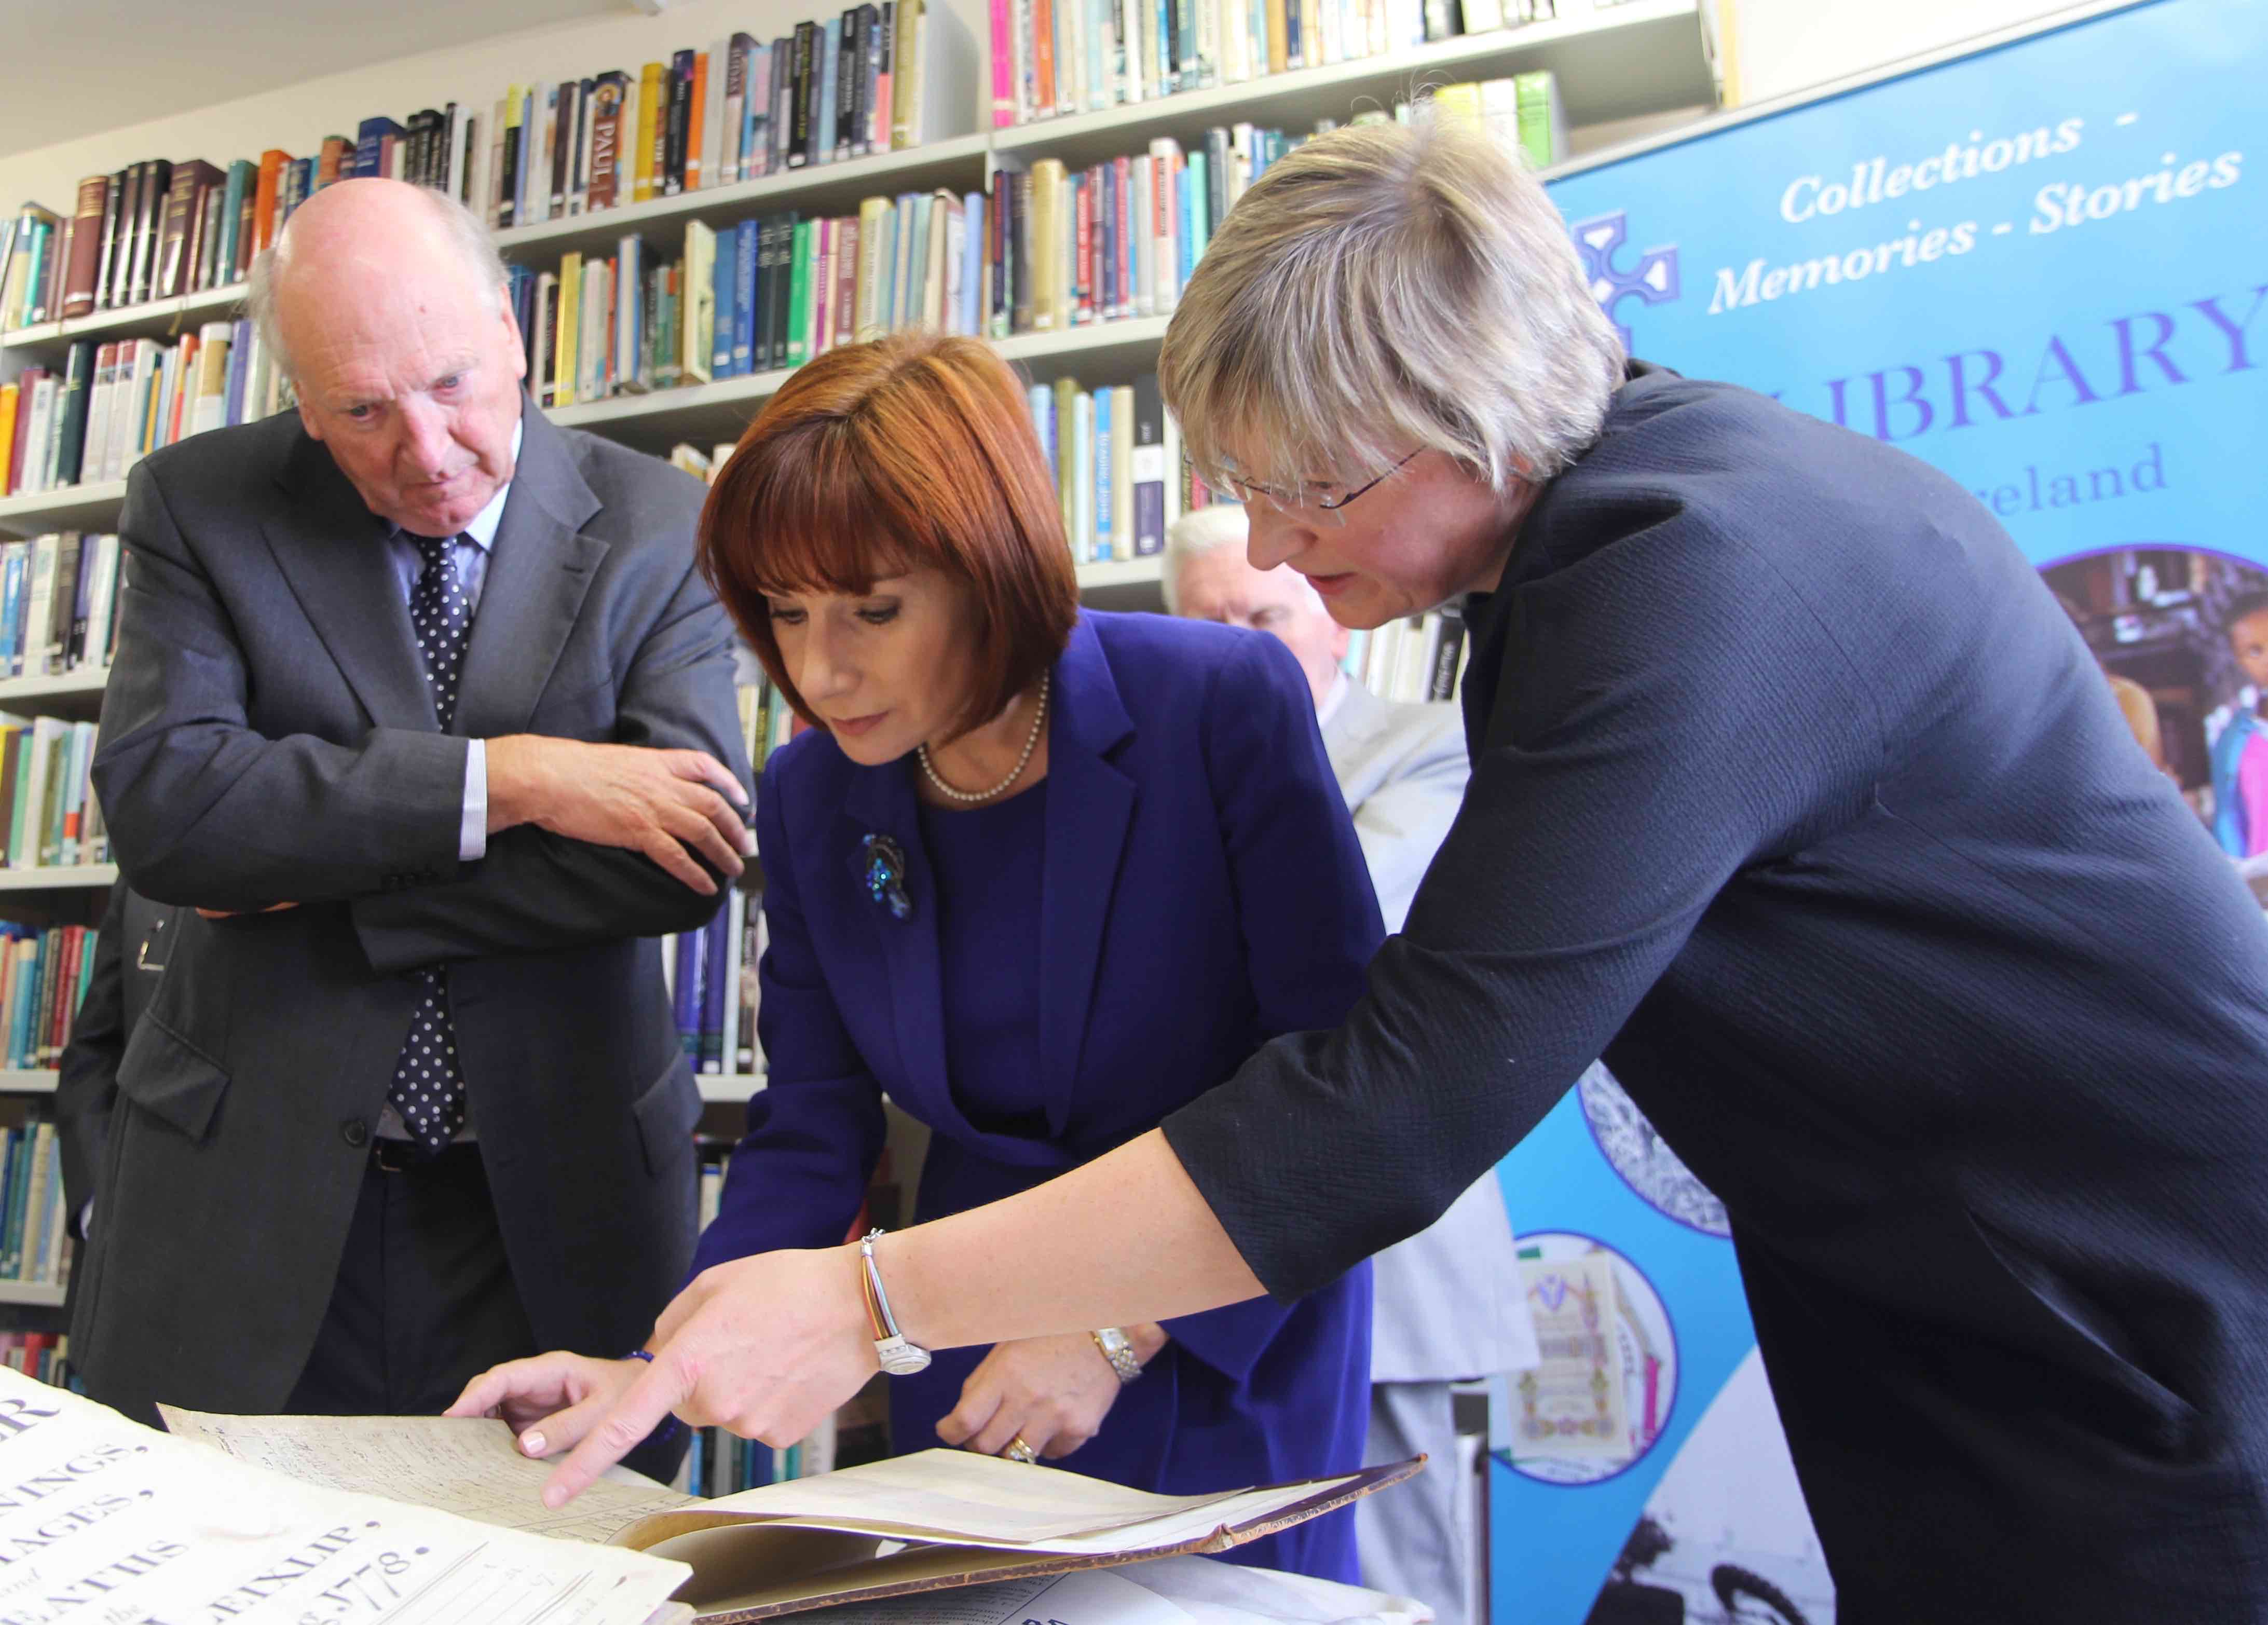 Minister for Culture, Heritage and the Gaeltacht Josepha Madigan TD viewing the register of St John's with the Librarian and Archivist, Dr Susan Hood, and Dr Michael Webb, Chairperson of the Library and Archives Committee.